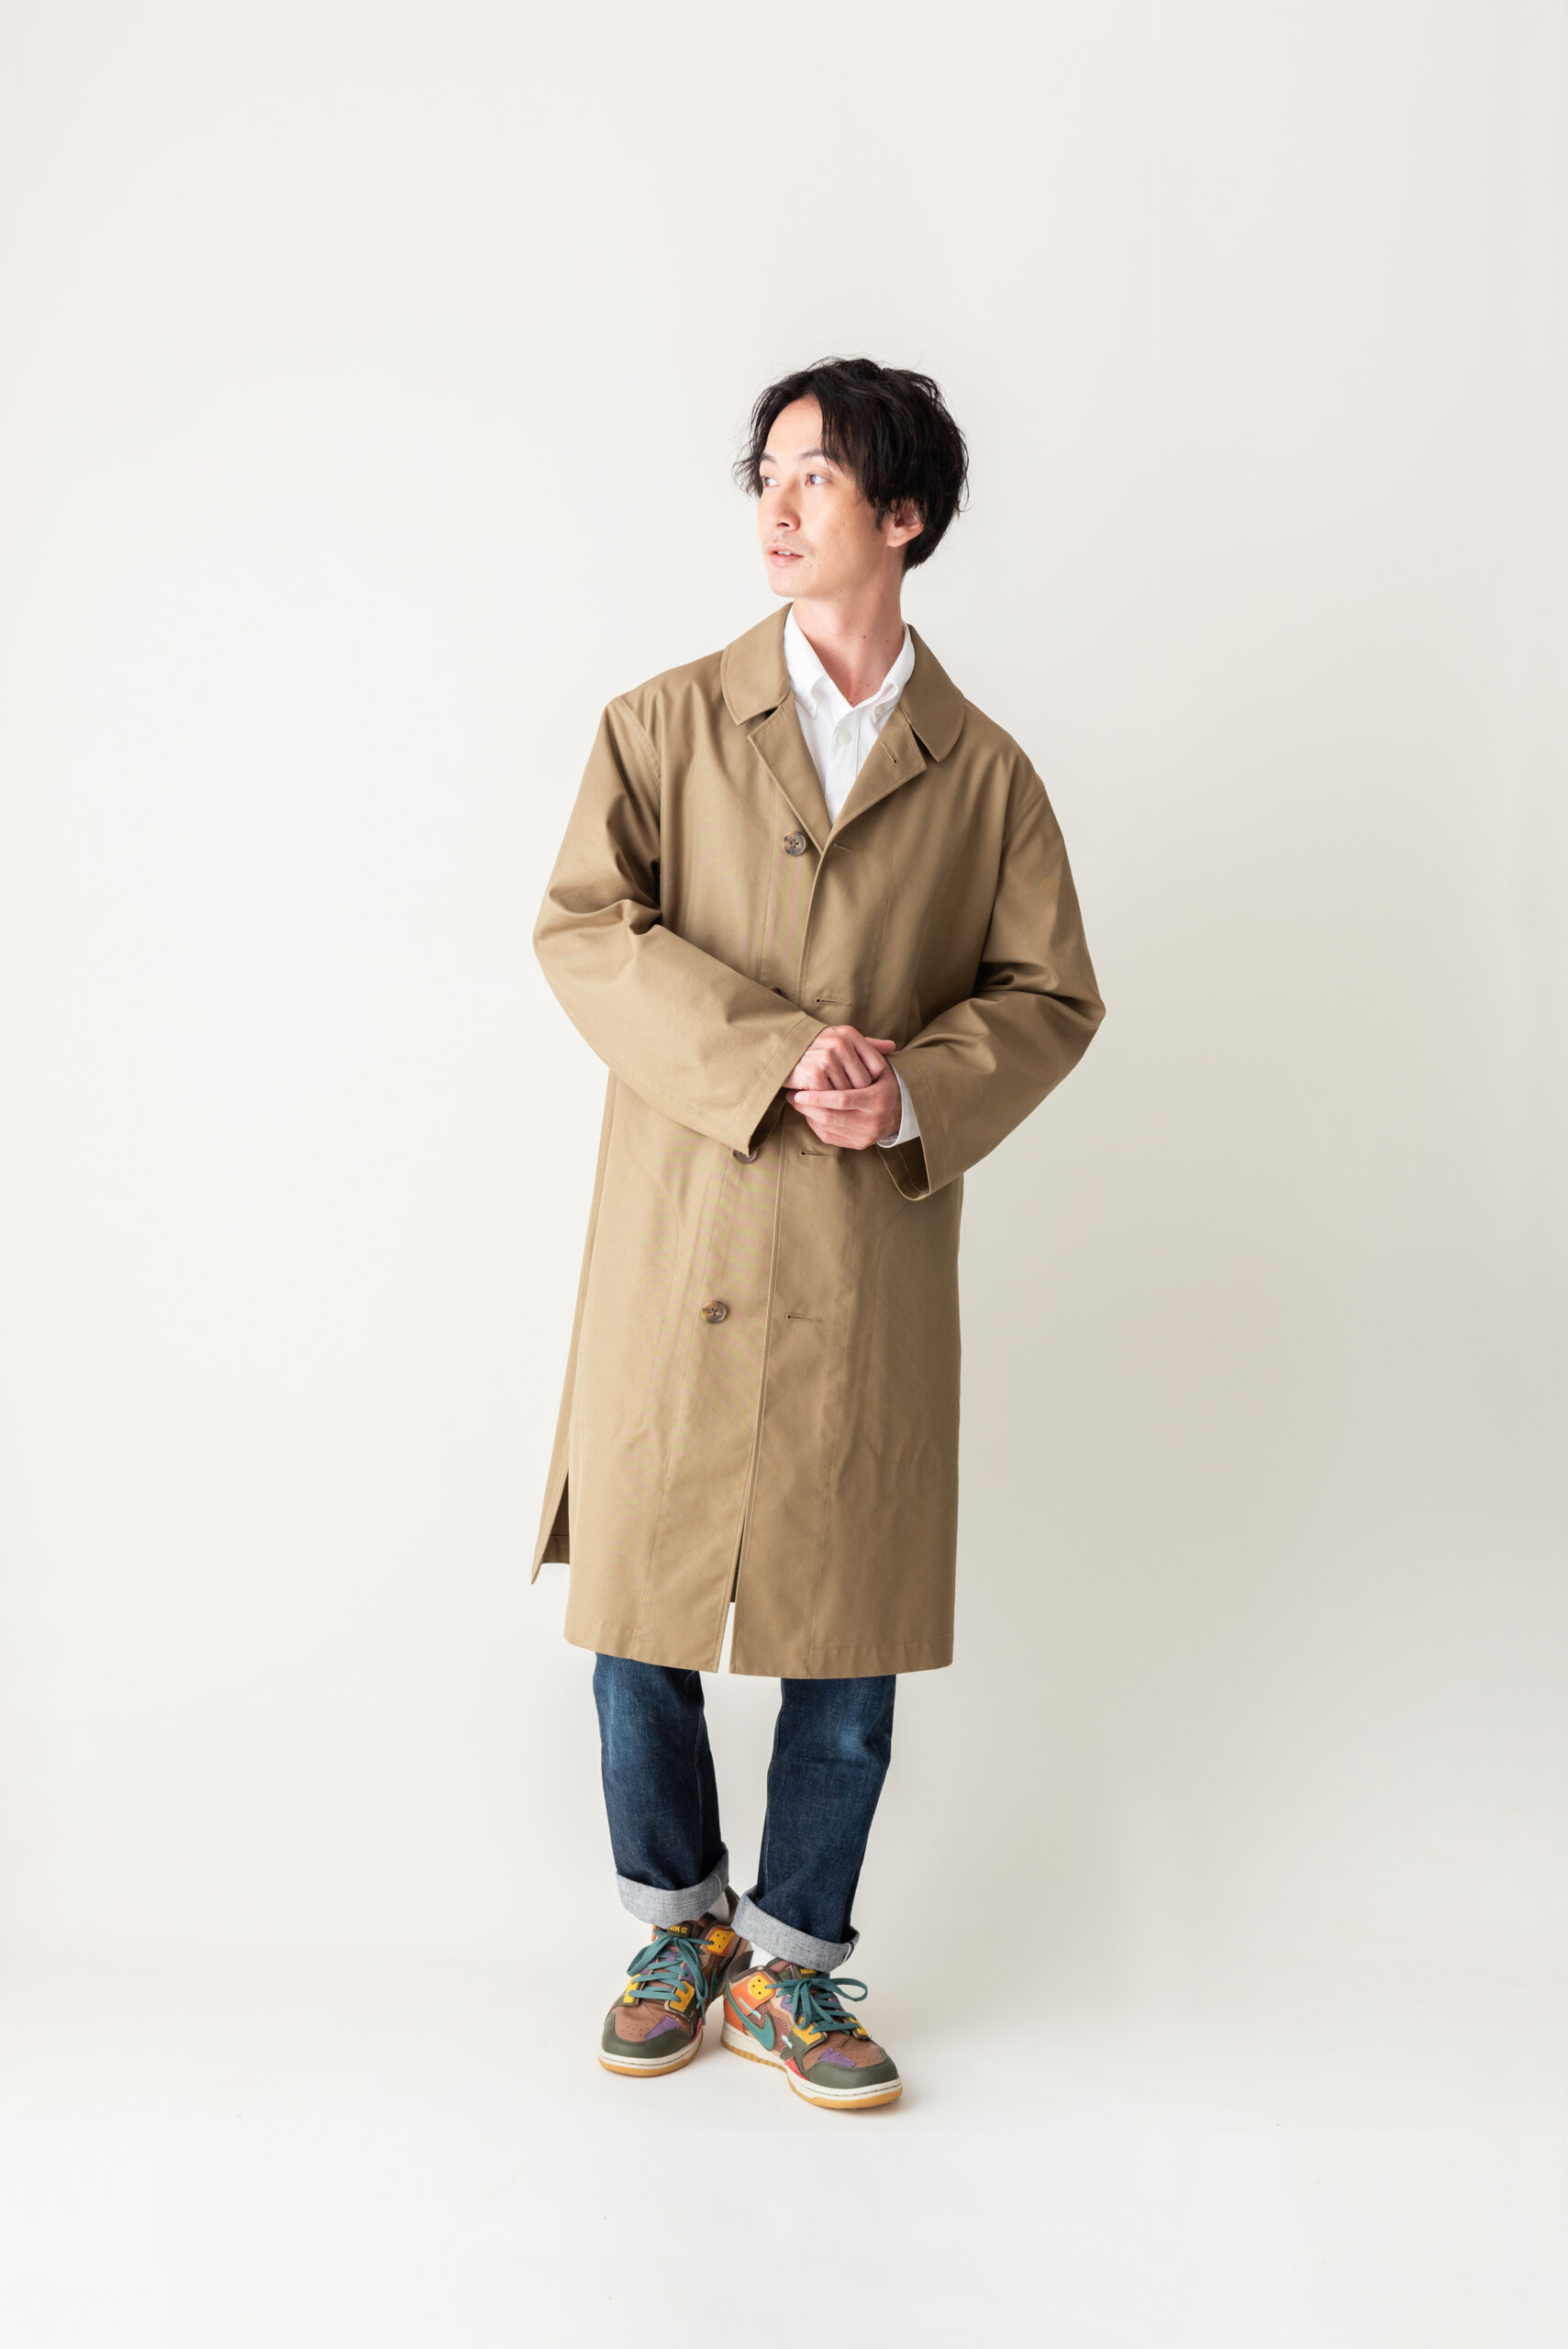 Read more about the article Balmacaan coat : Size Adjustment